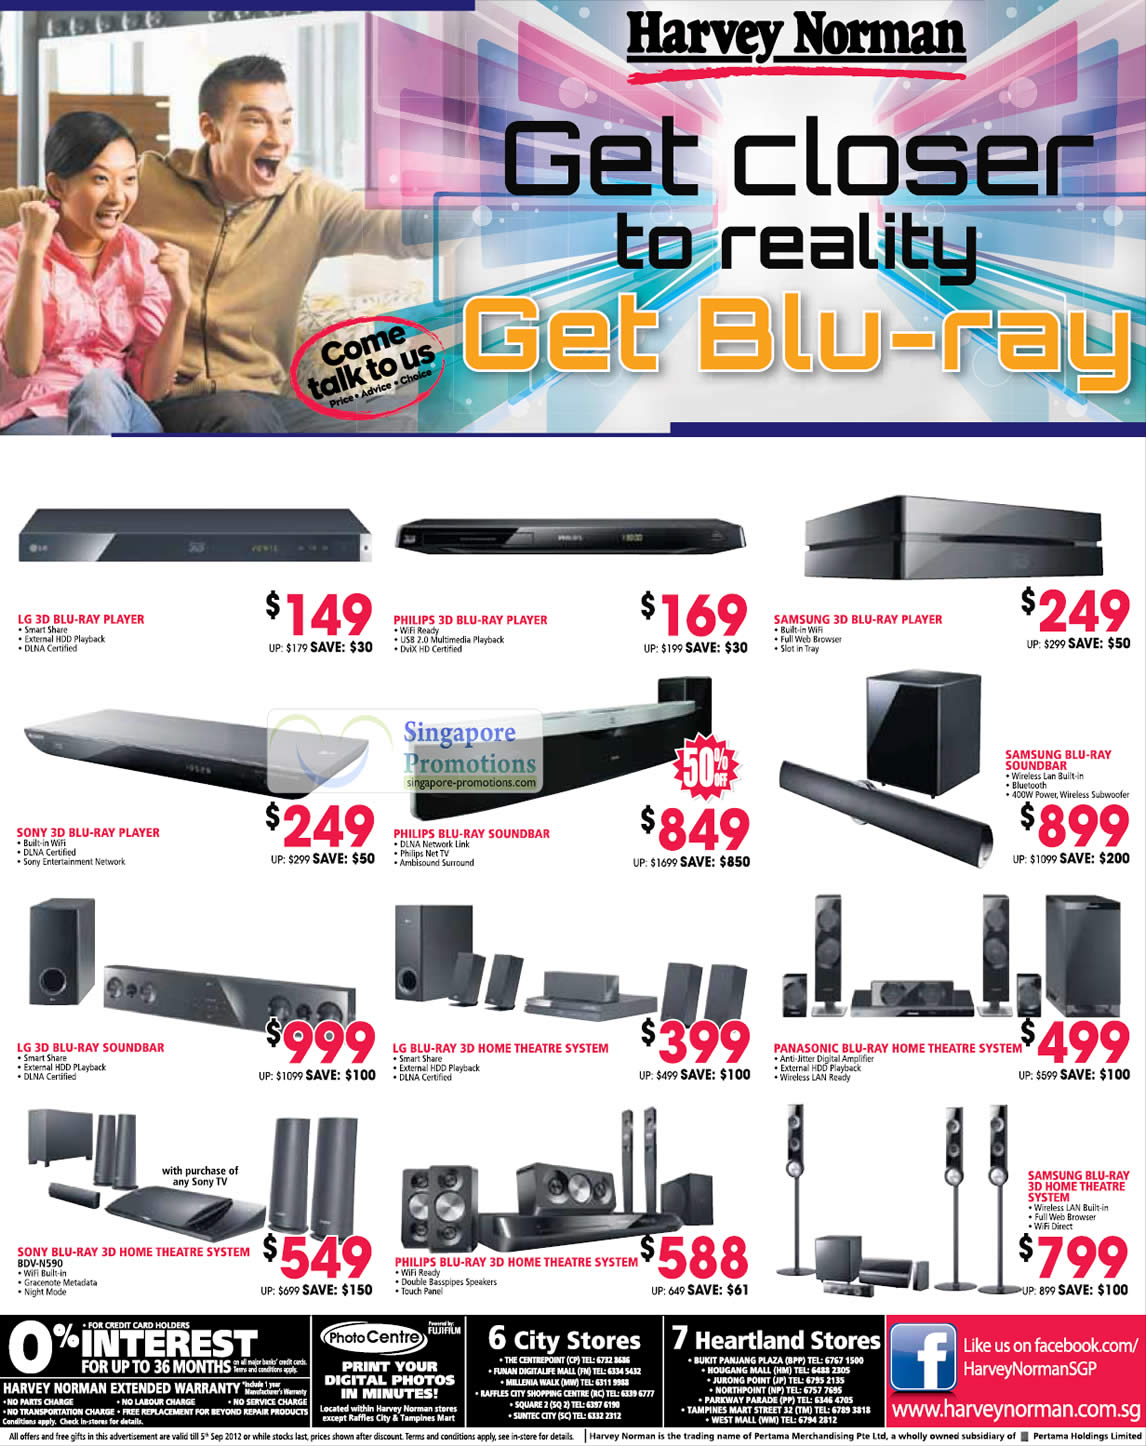 Featured image for Harvey Norman 8 Tips On Buying Blu-Ray Players & Offers 30 Aug - 5 Sep 2012